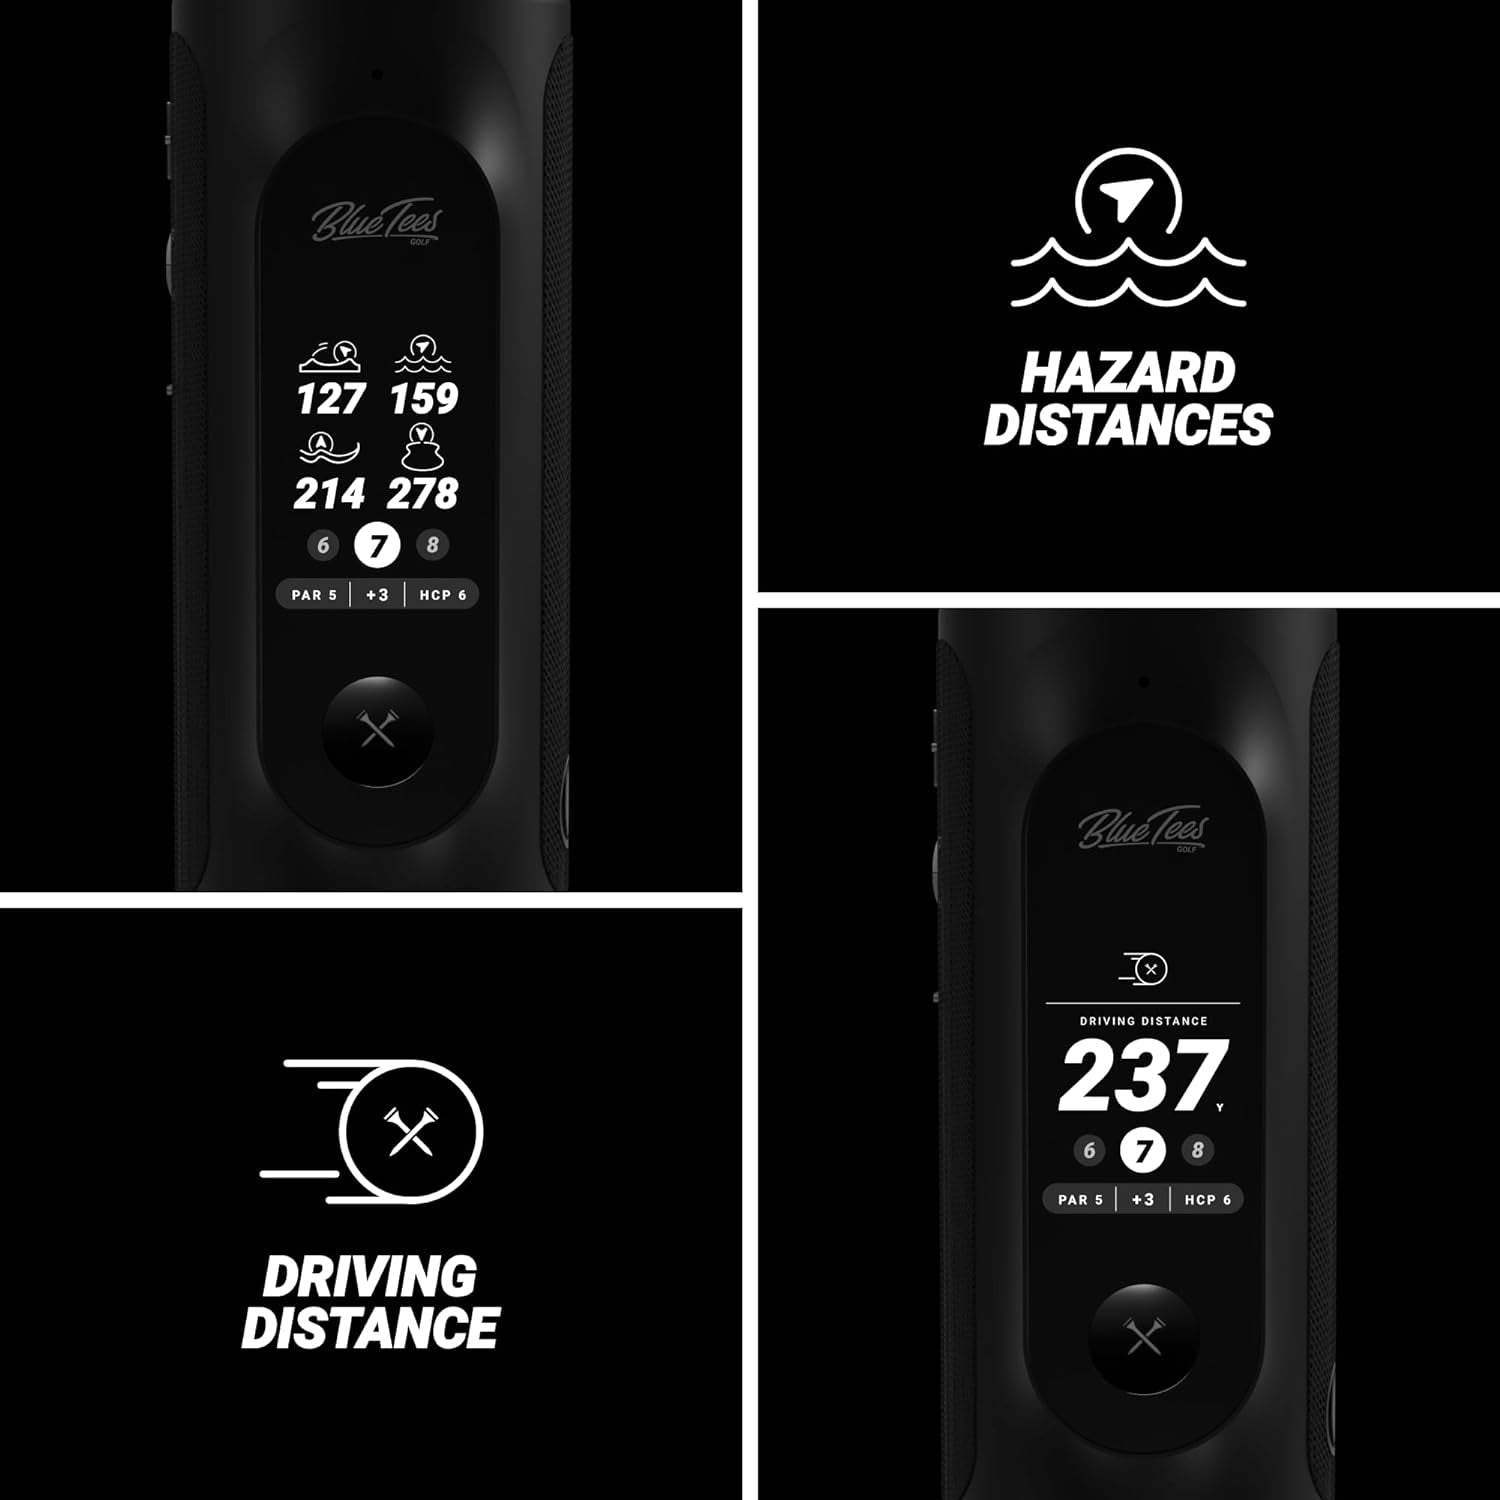 Player+ GPS Speaker with Touch Screen Display - 10+ Hours Battery - Visual + Audible Distance, Hazard Distance - IPX7 Waterproof (Black)